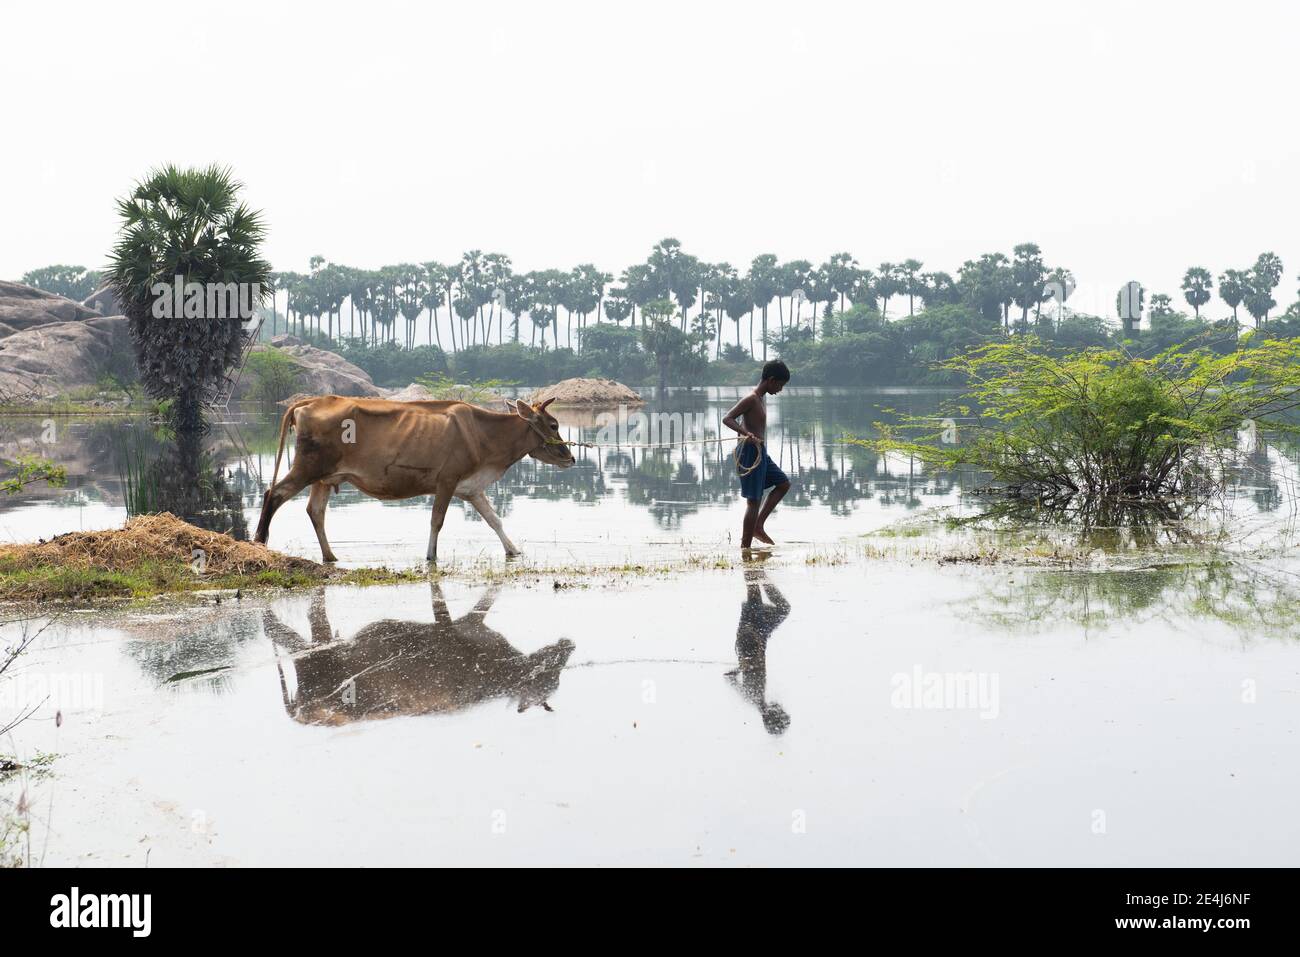 Gingee, Tamil Nadu, India - January 2021: A boy taking a cow to the lake. Stock Photo